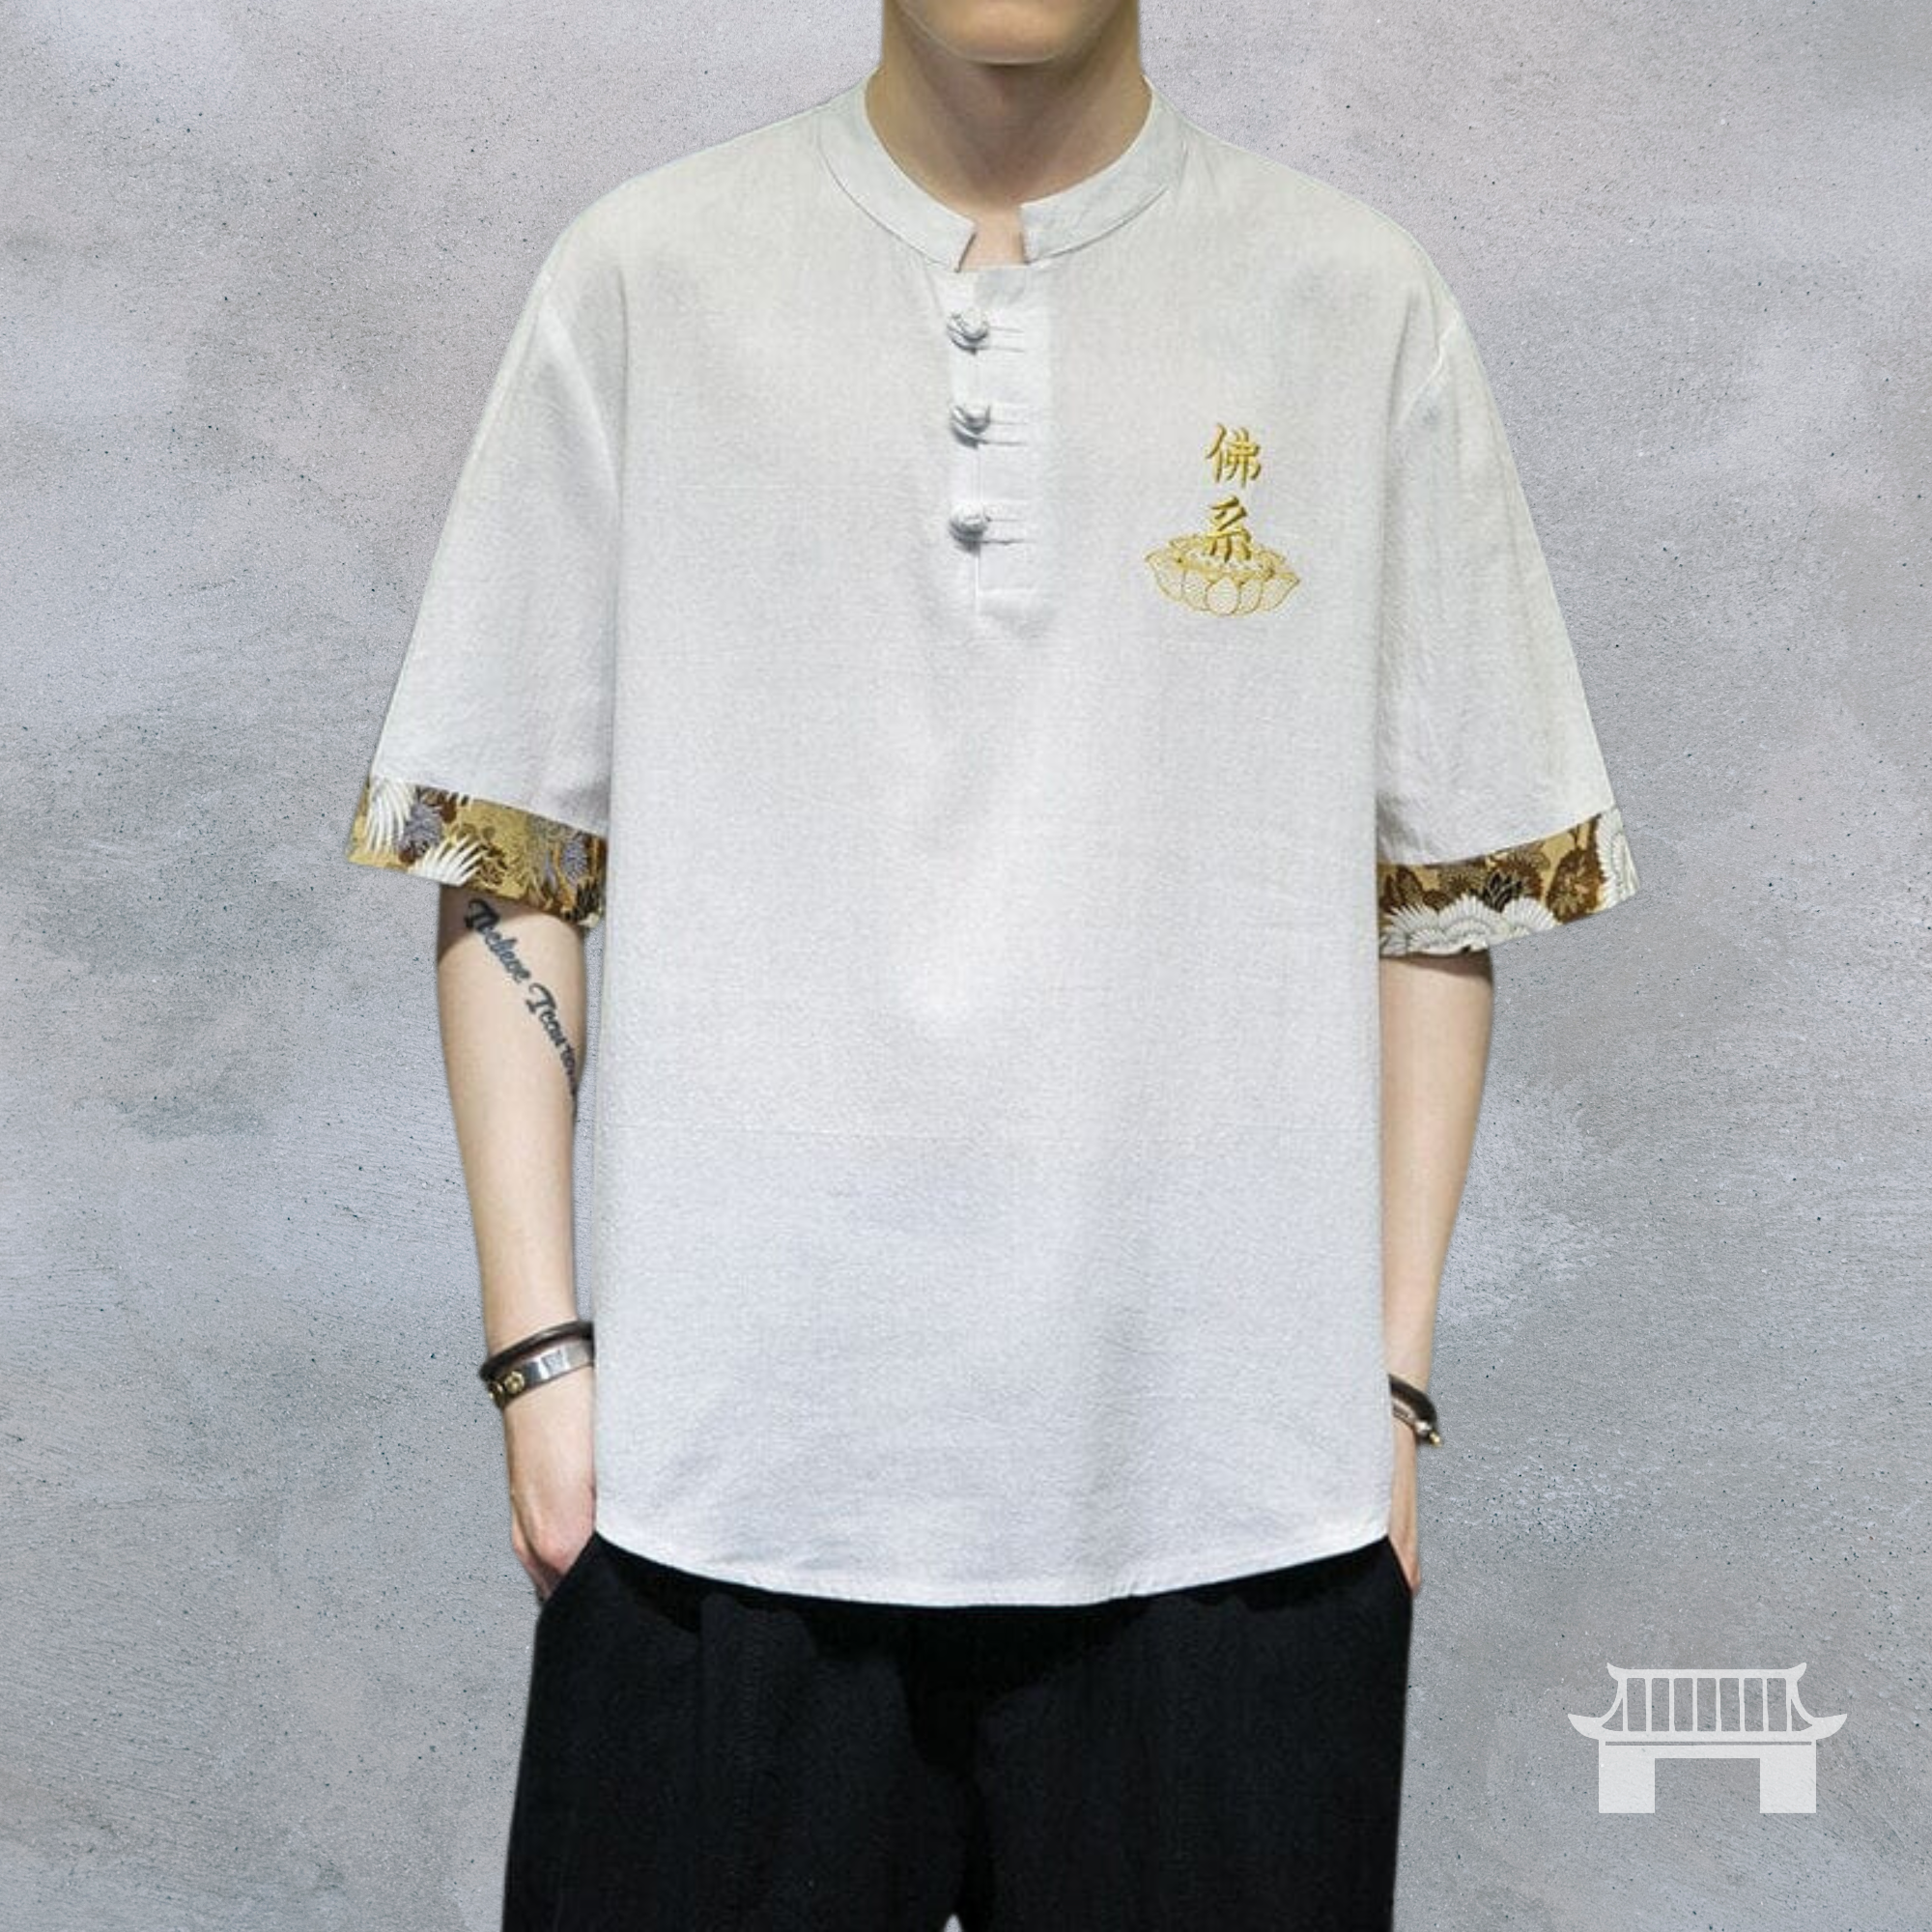 Authentic Embroidered Wu Dang Hanfu T-Shirt